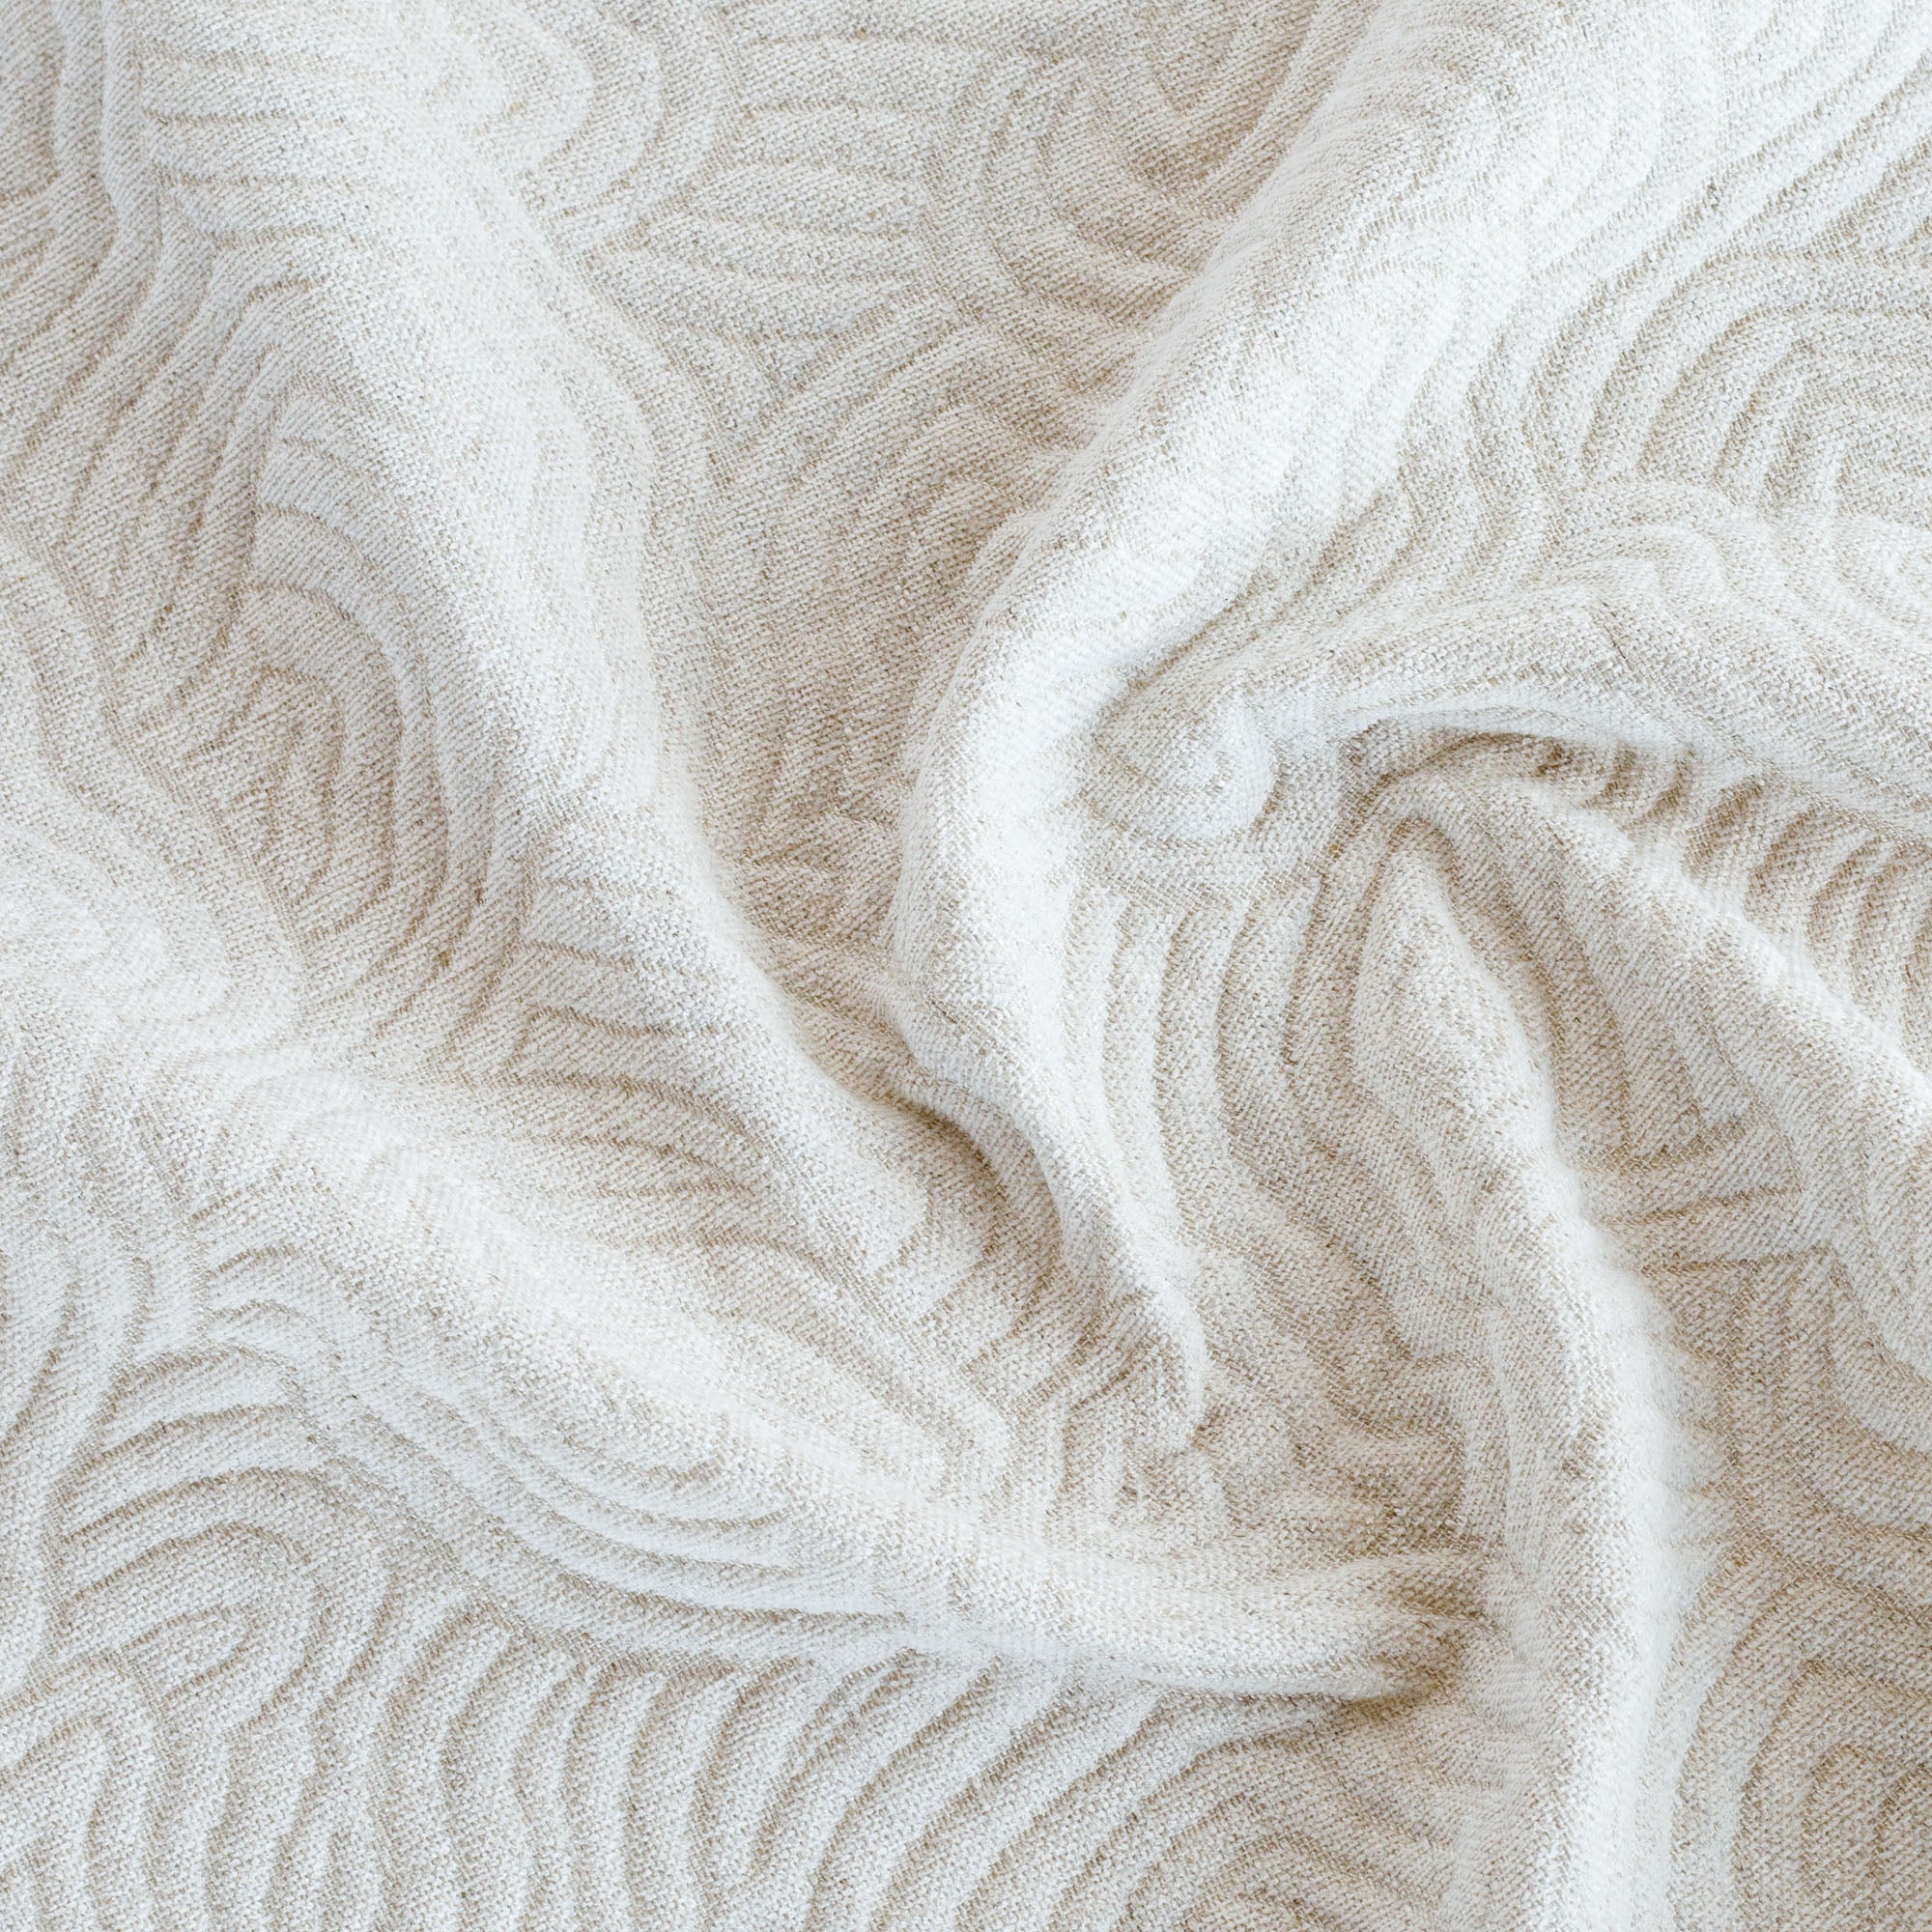 a soft cream and beige quilted abstract wave patterned home decor fabric 